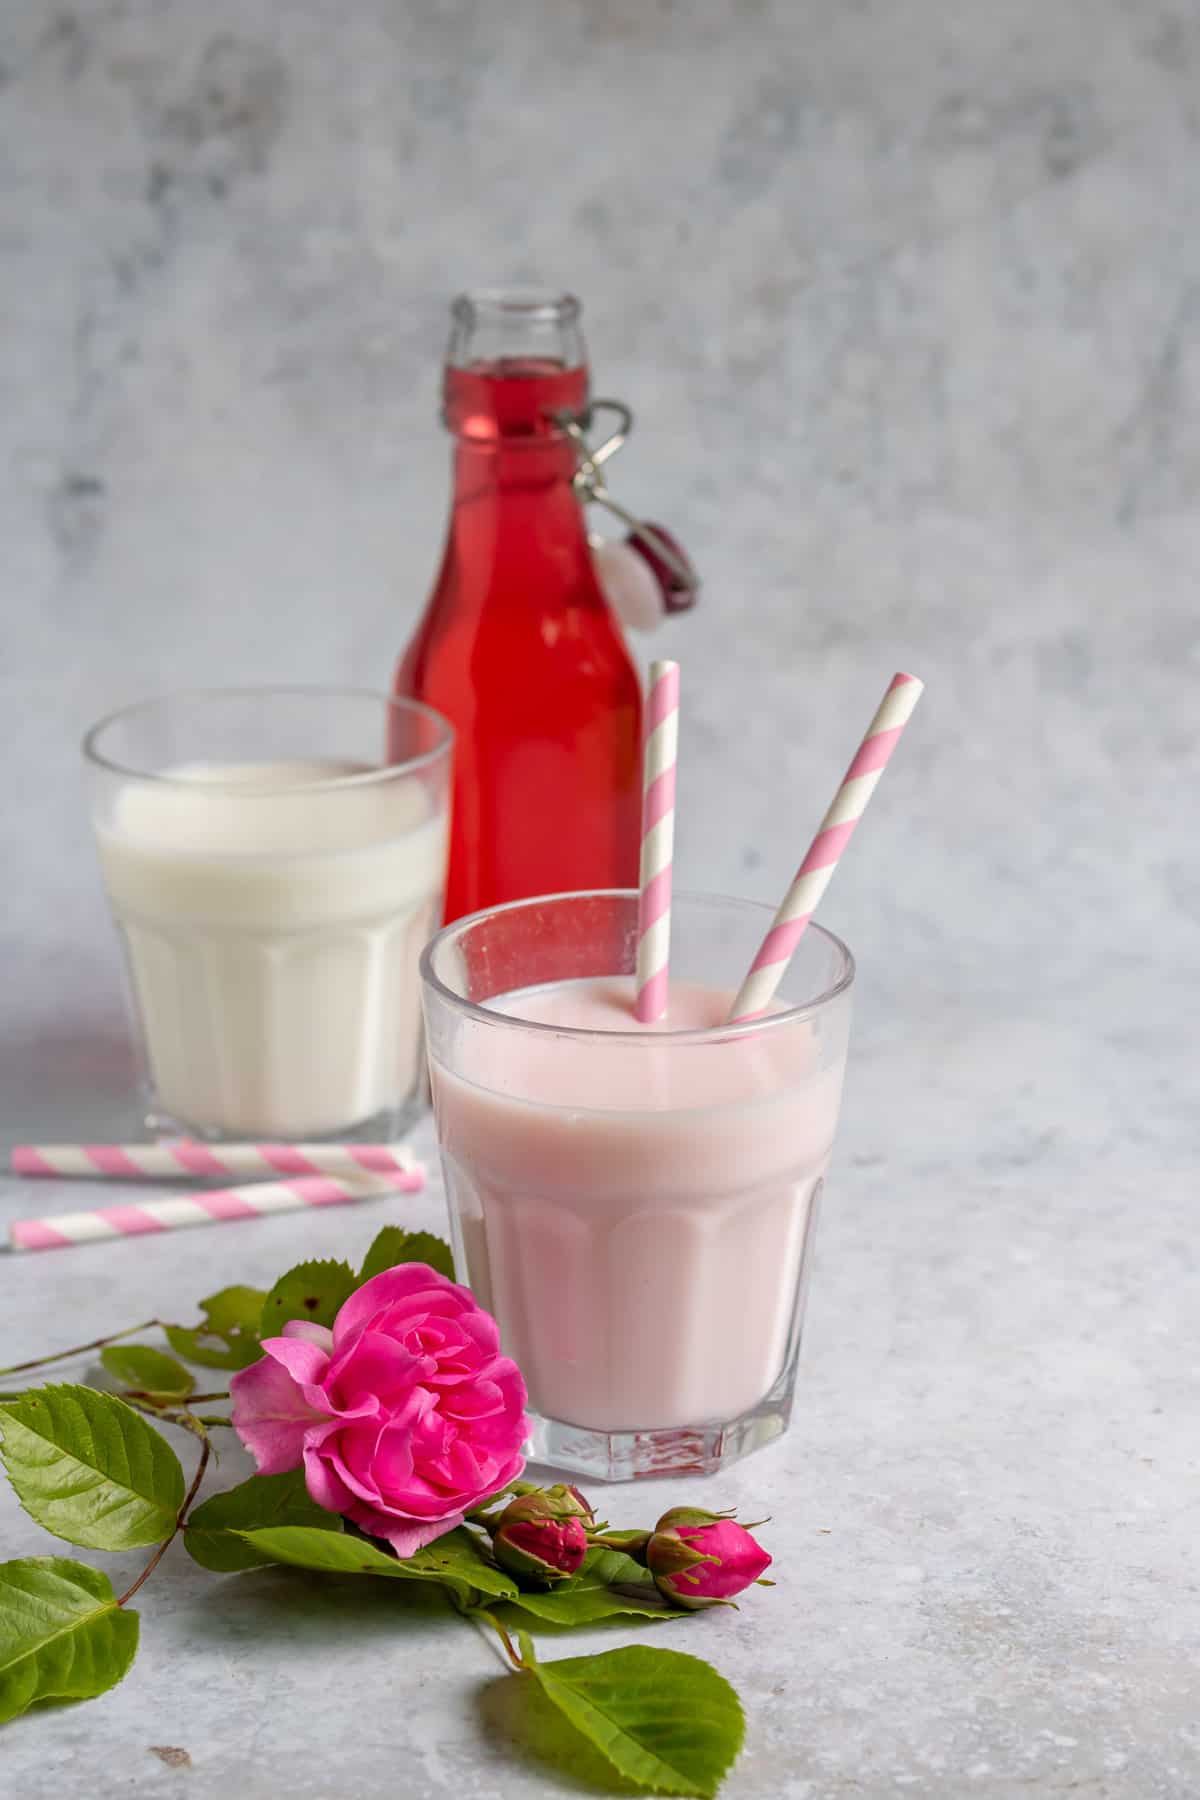 Glass of rose milk with striped straws.